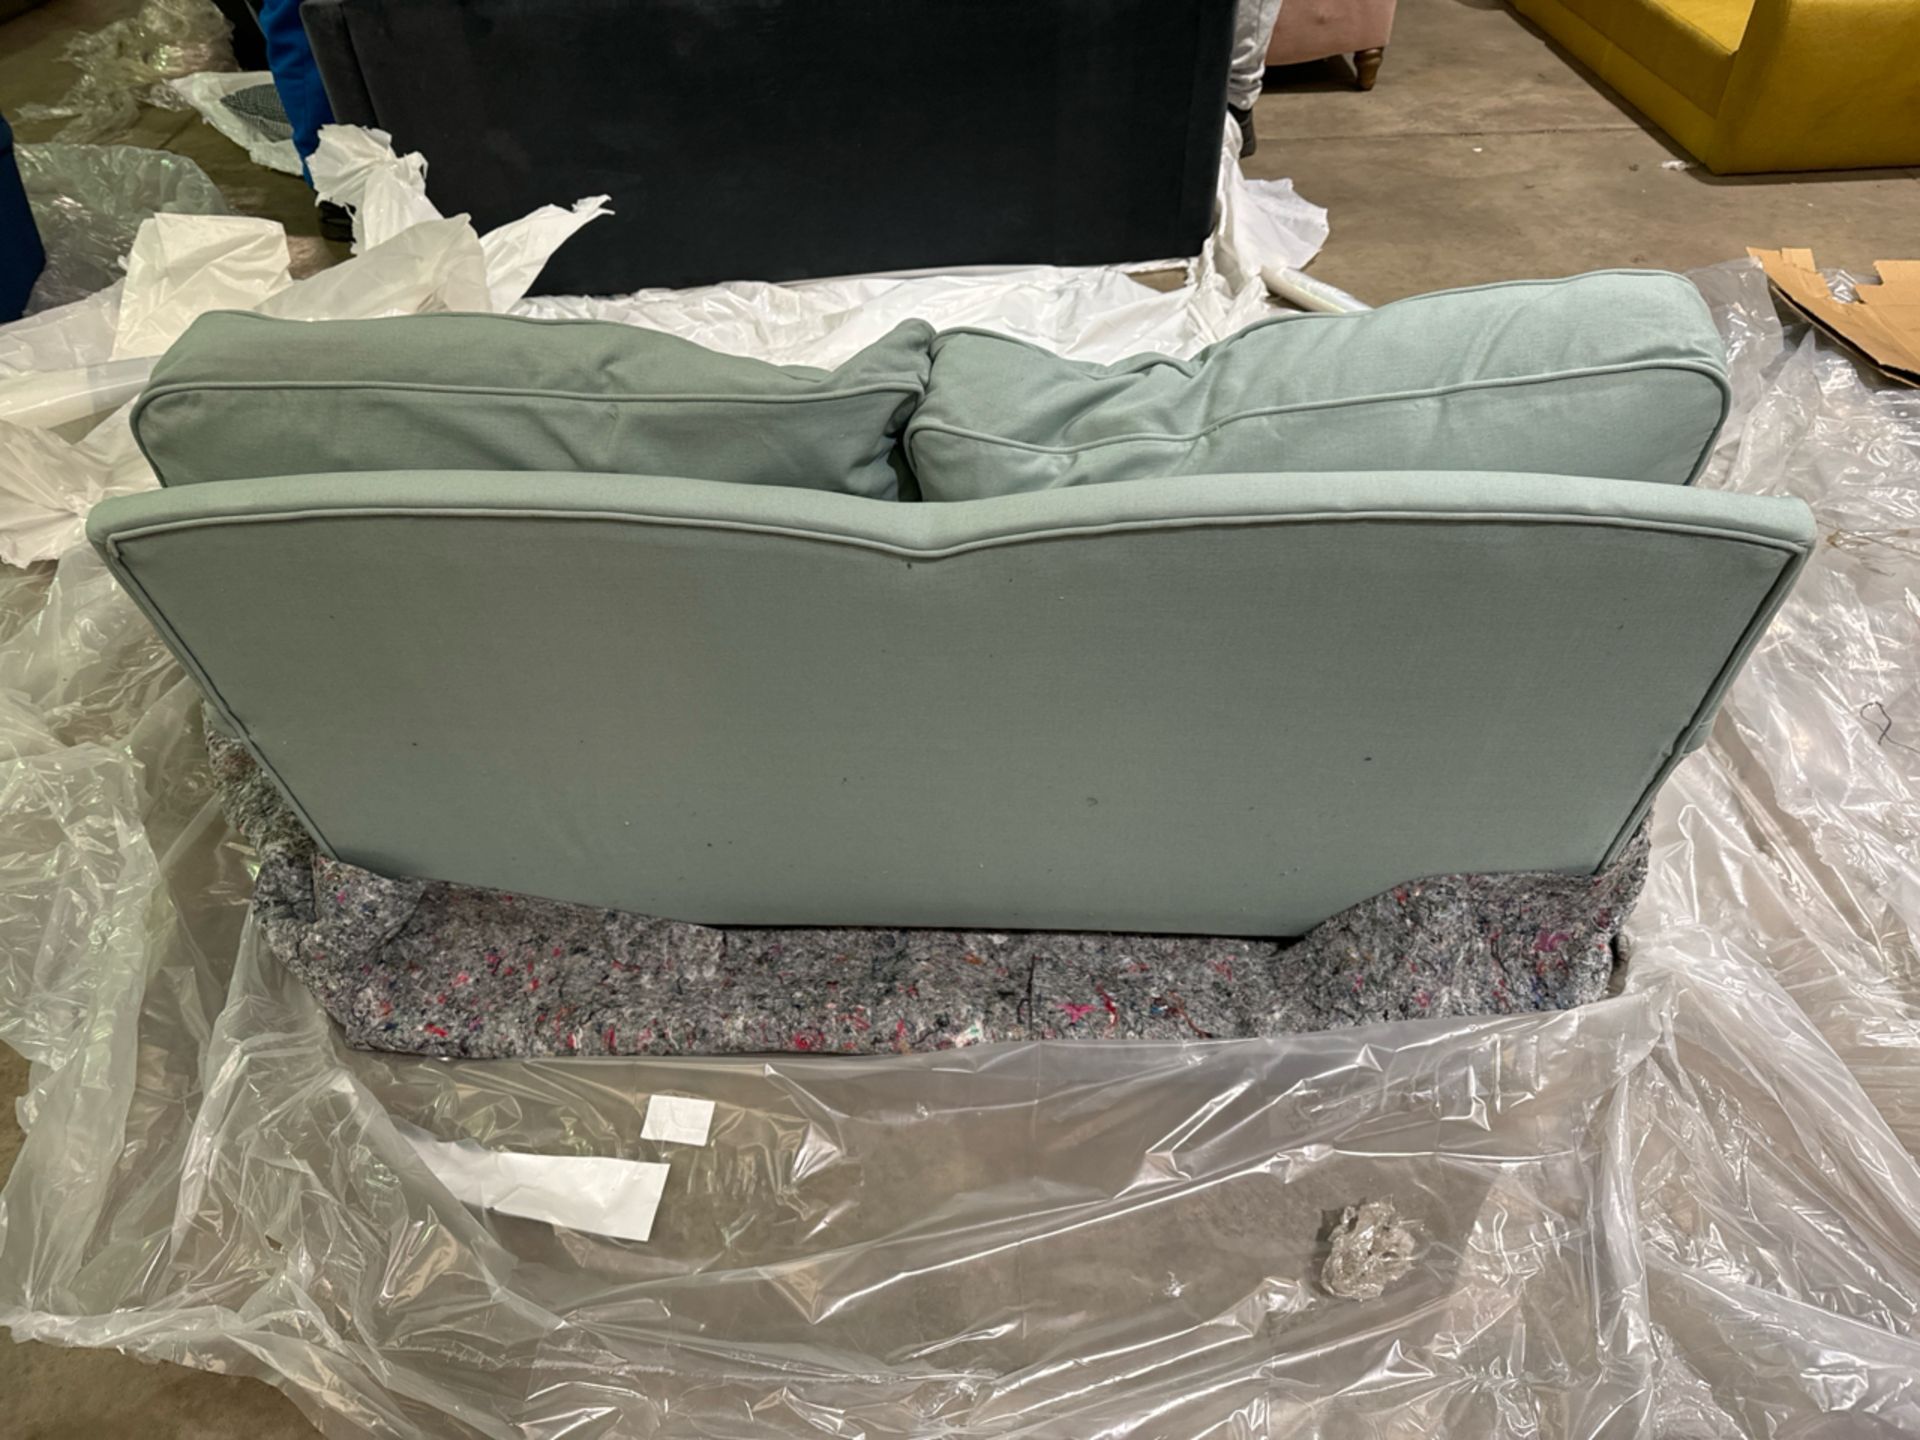 Bluebell 2 Seat Sofa - Image 4 of 7